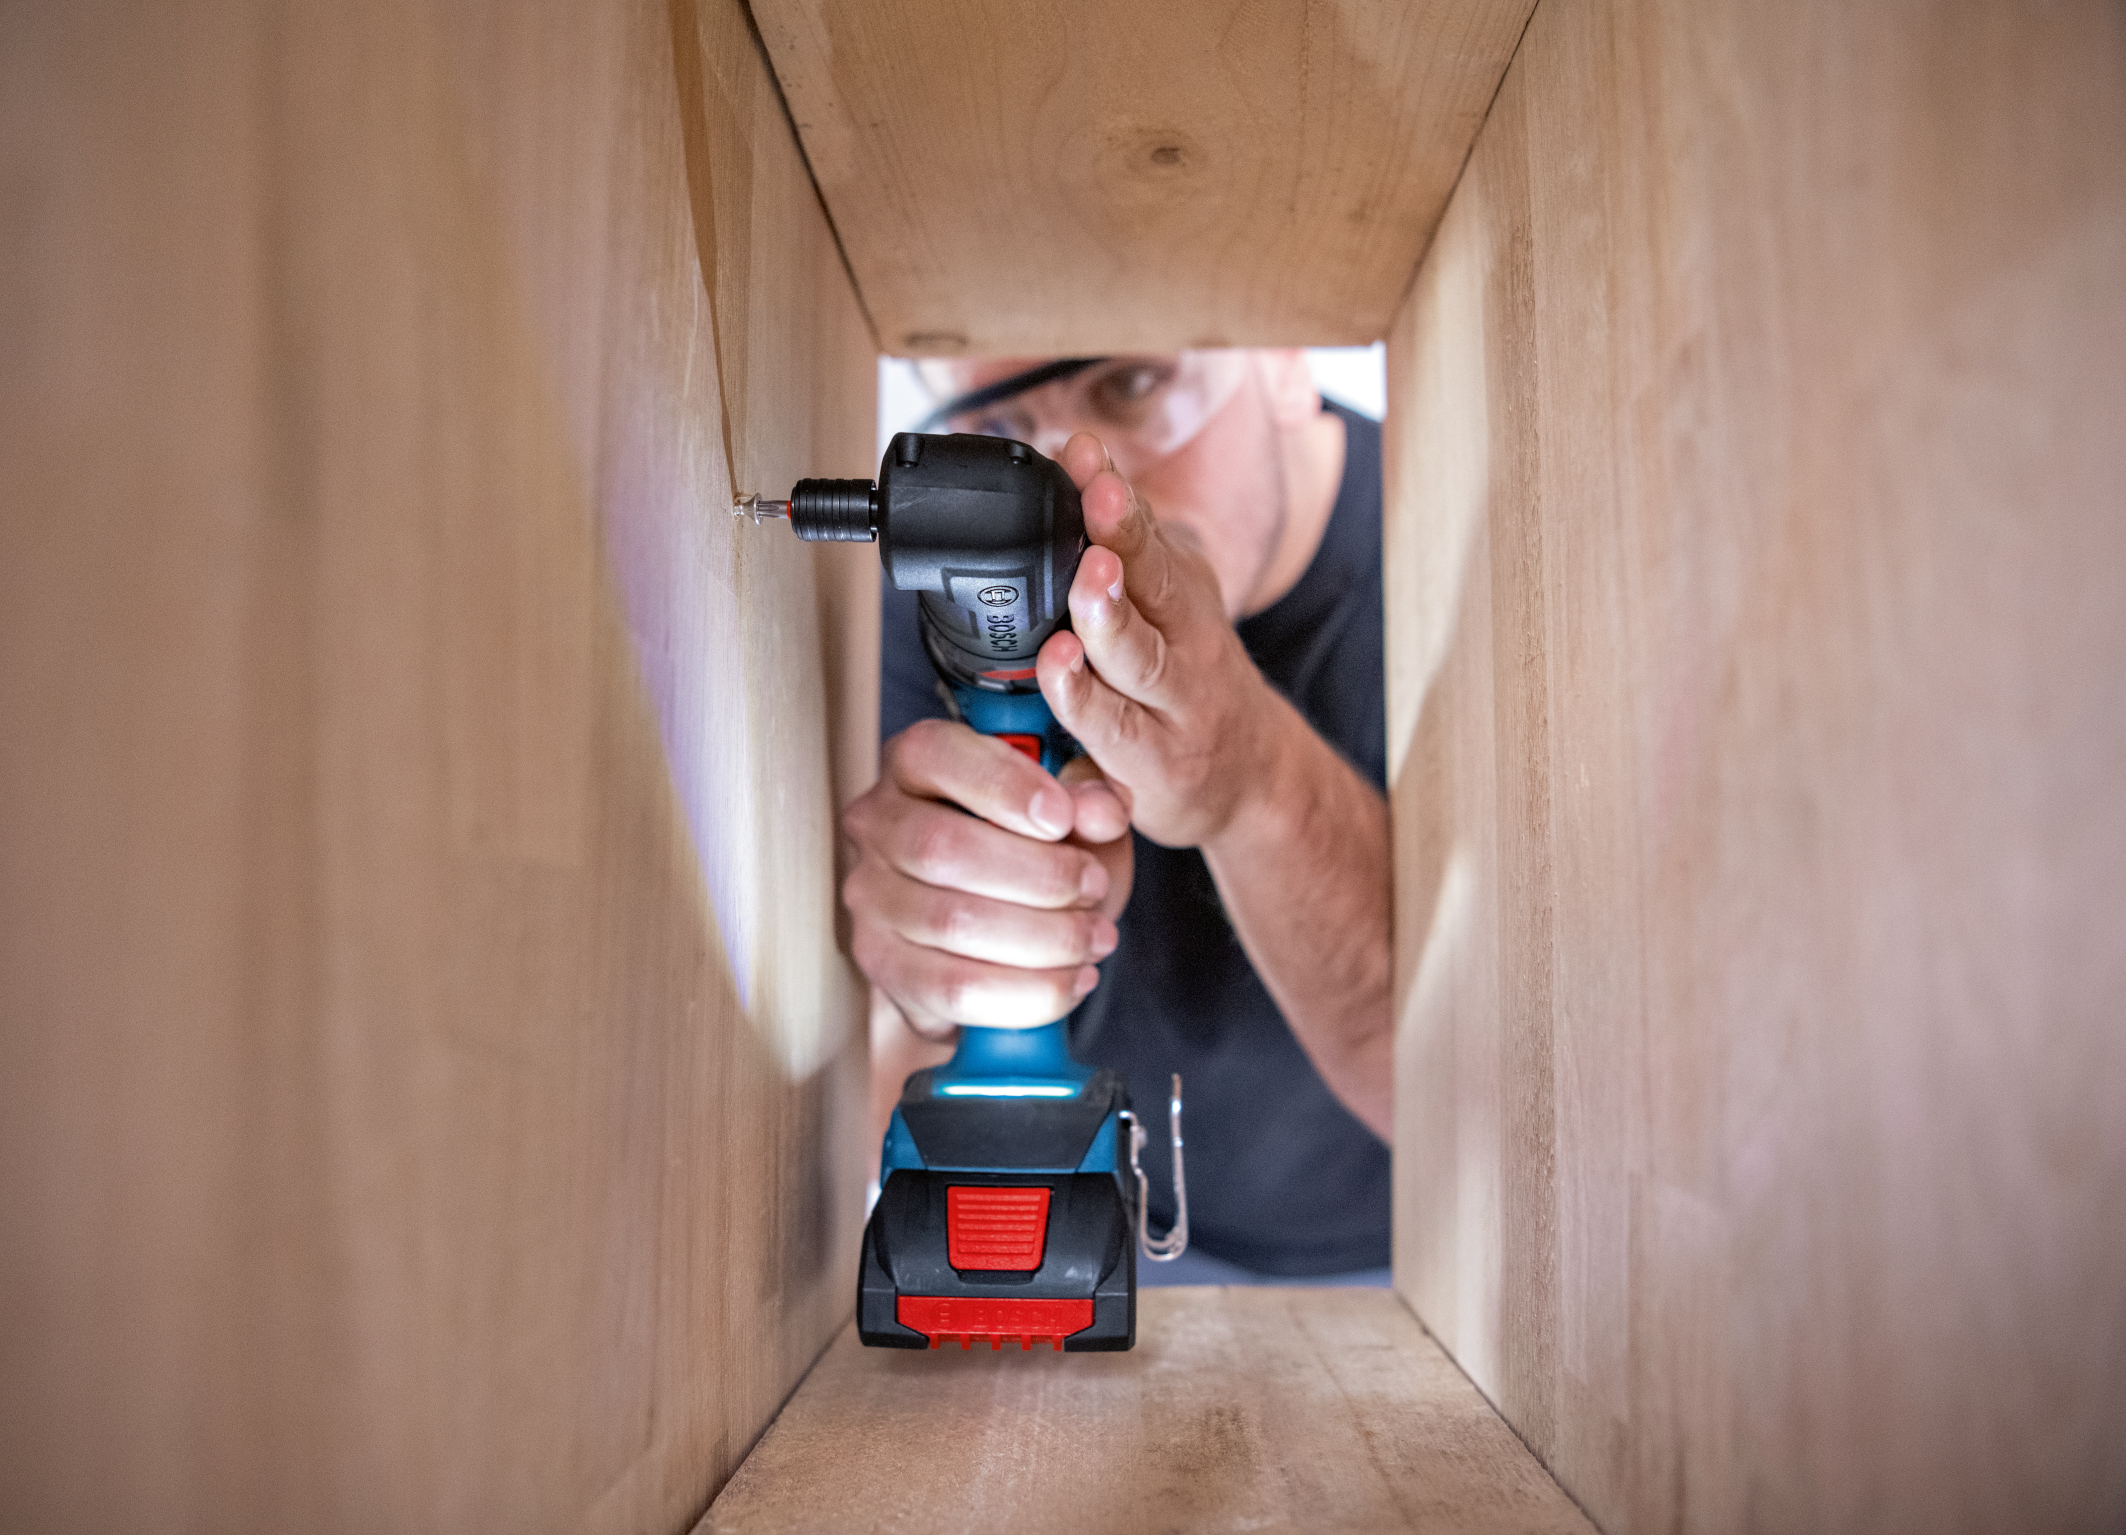 Bosch Professional Power Tools and Accessories